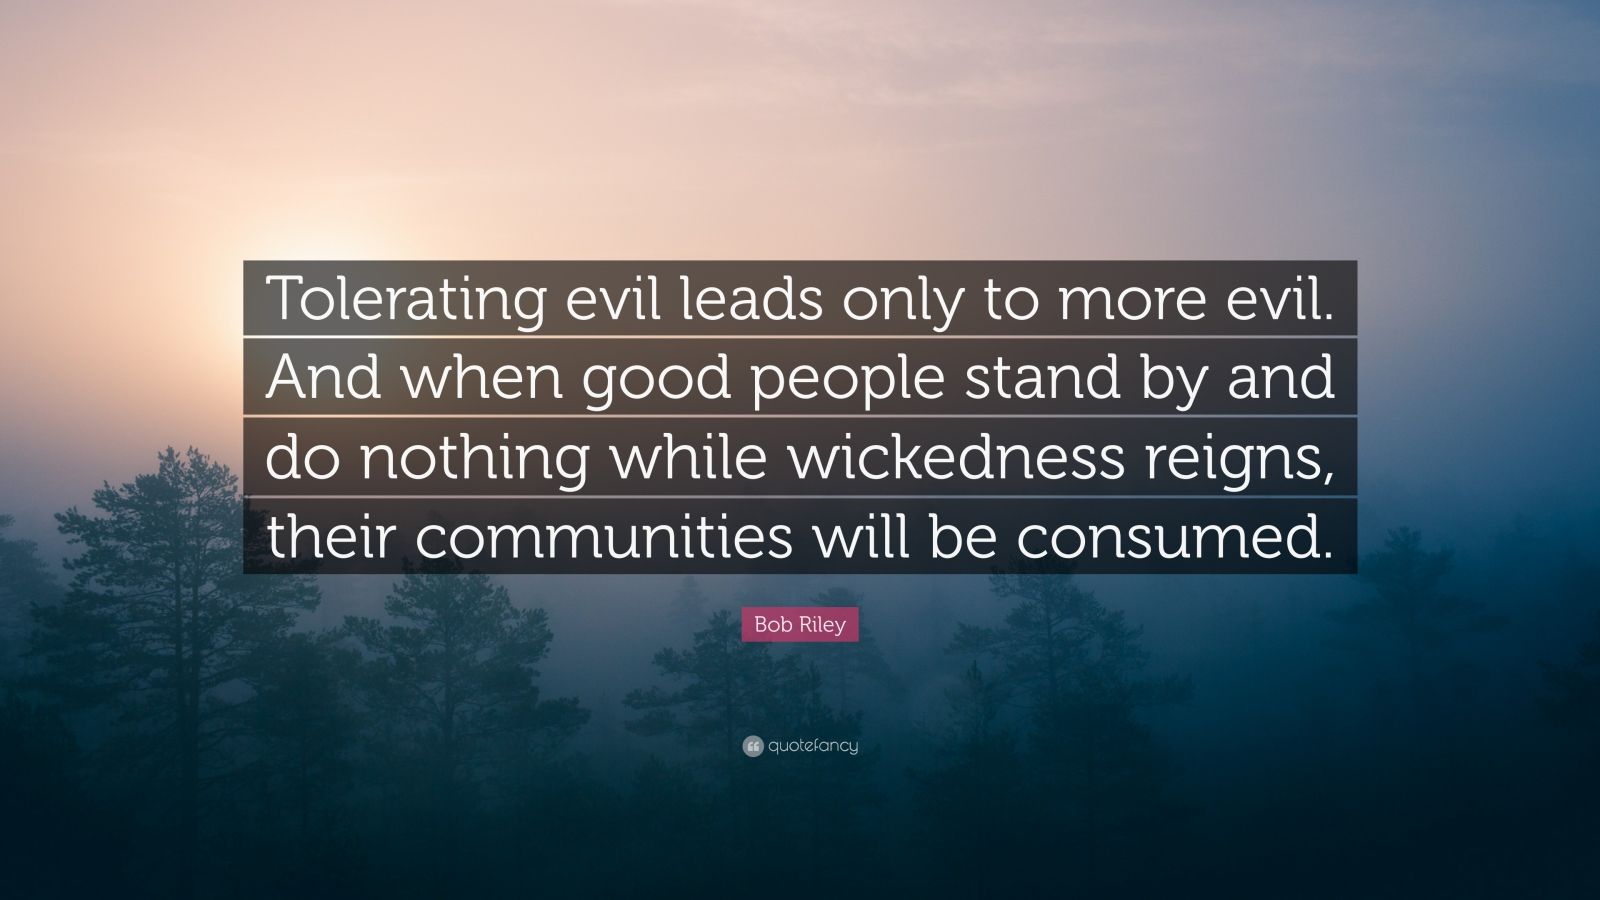 Bob Riley Quote: “Tolerating evil leads only to more evil. And when